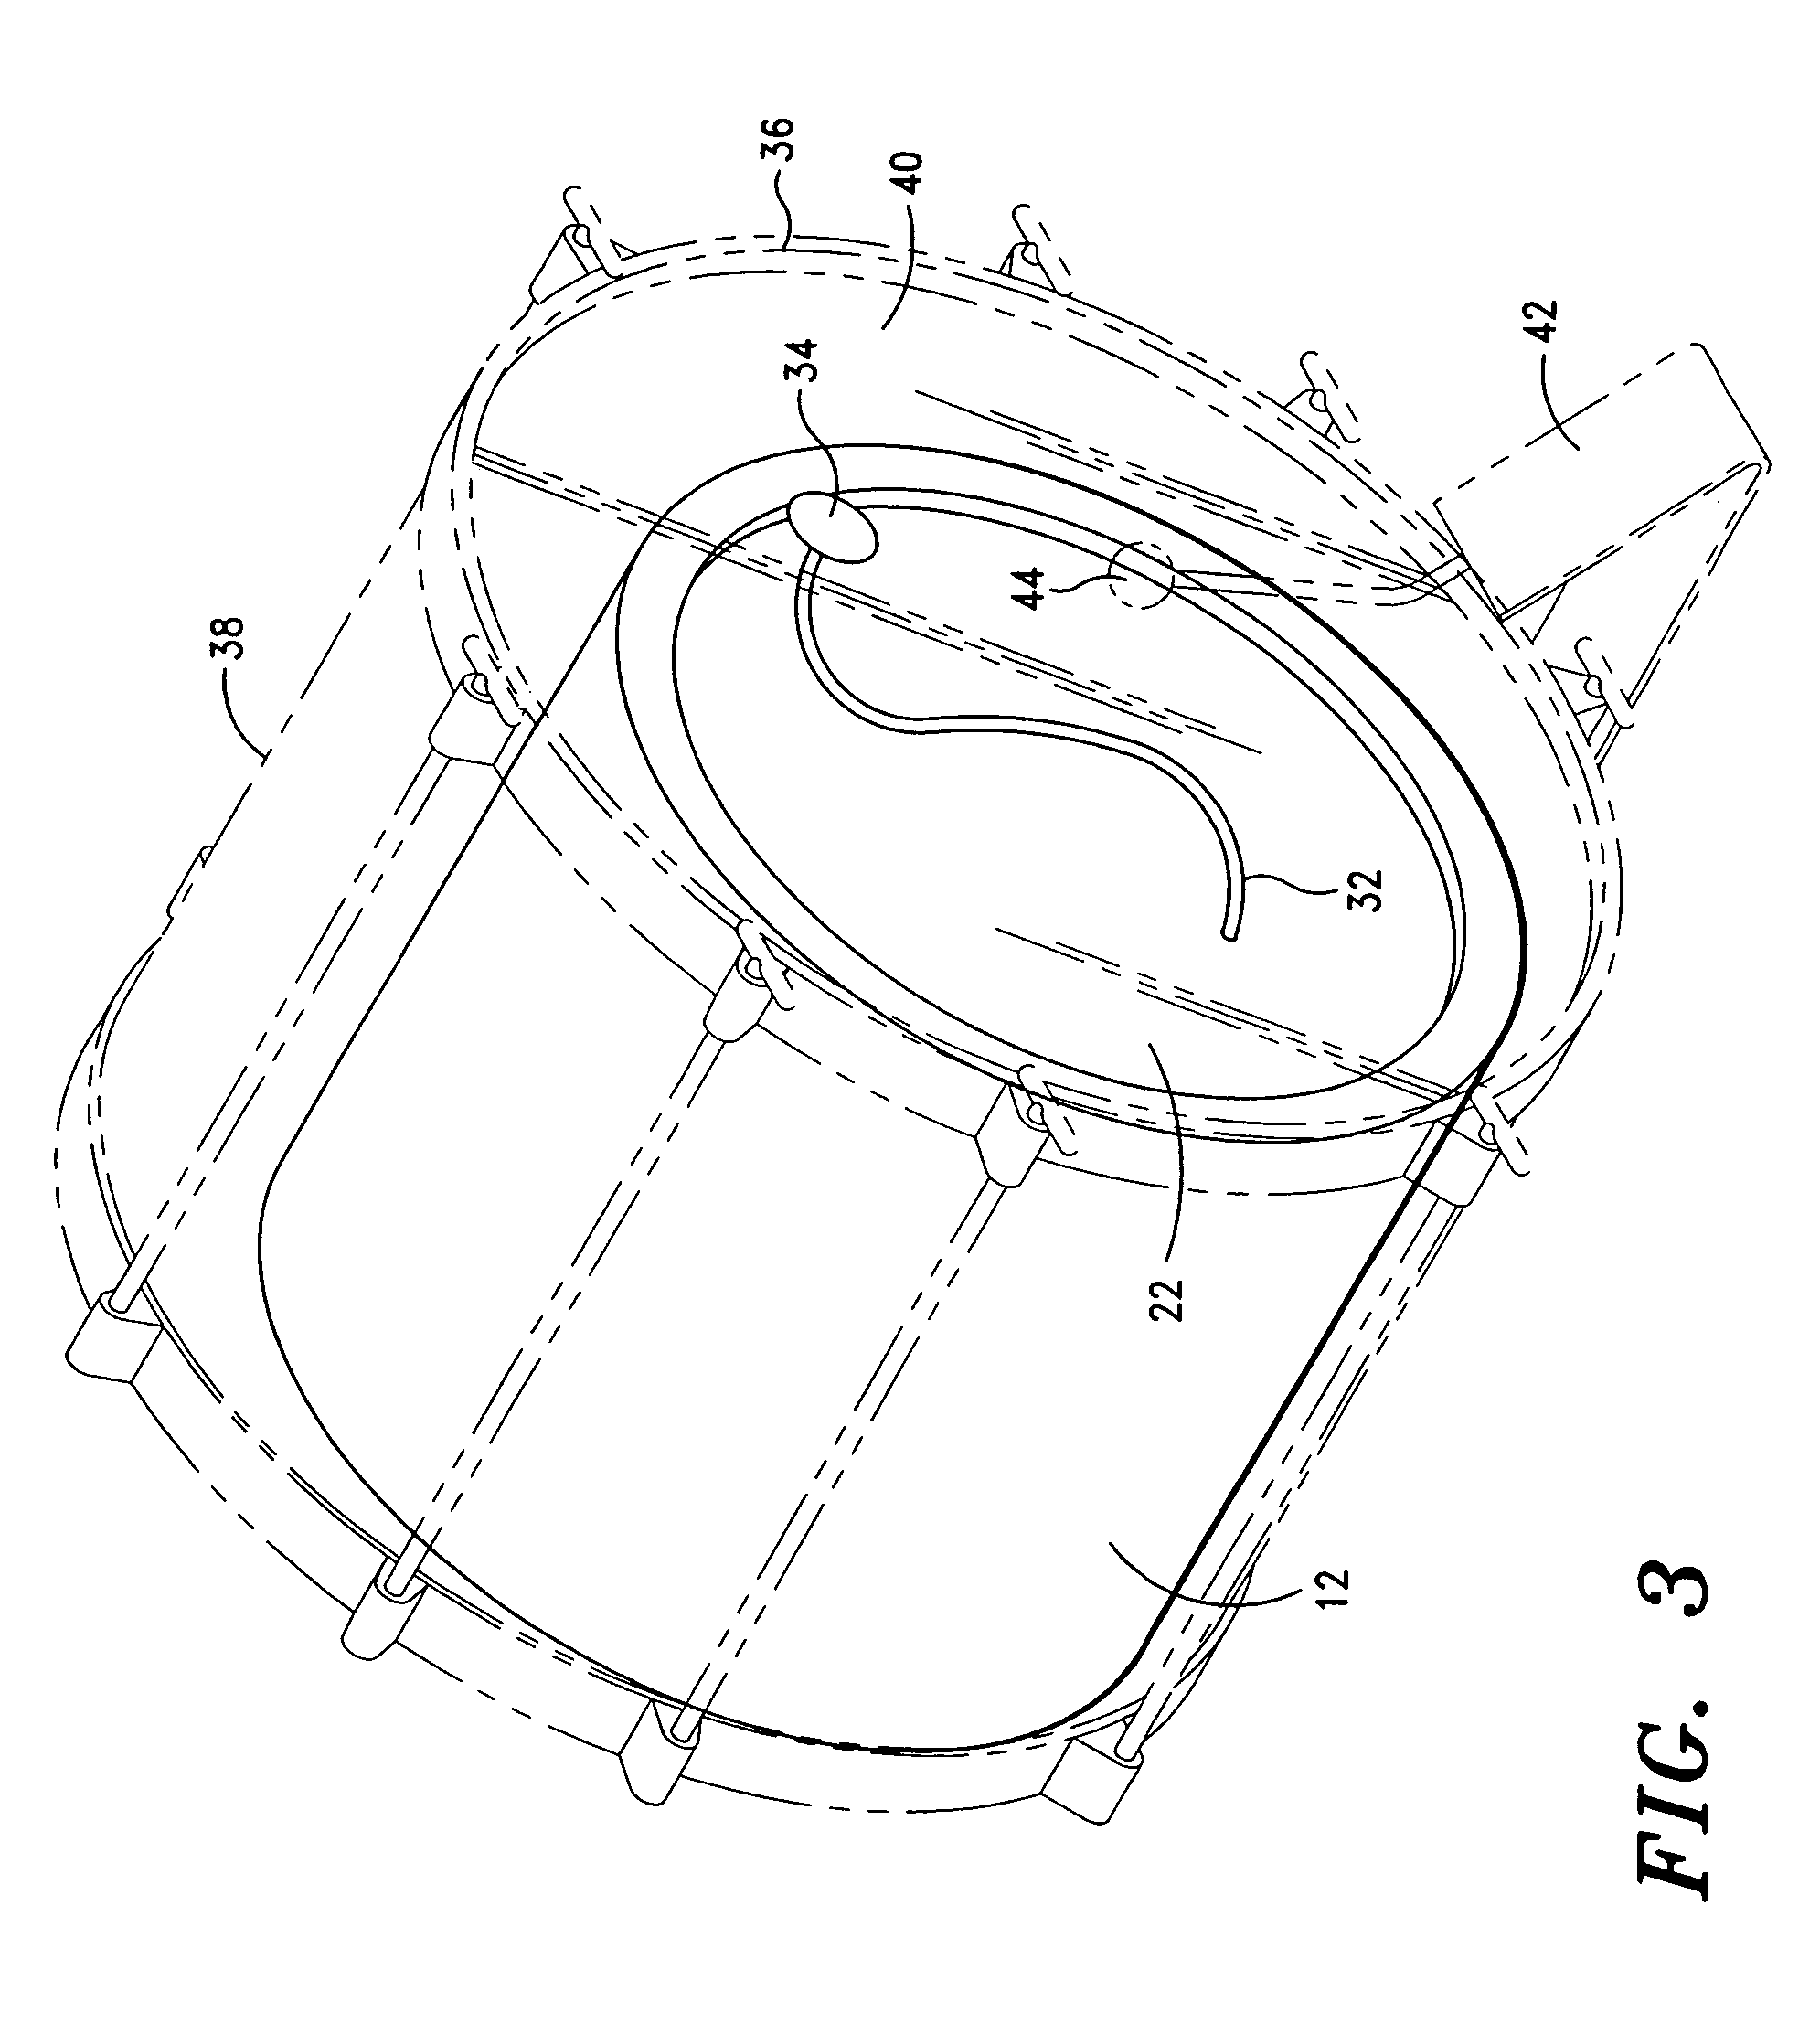 Sound augmentation system and method for a drum